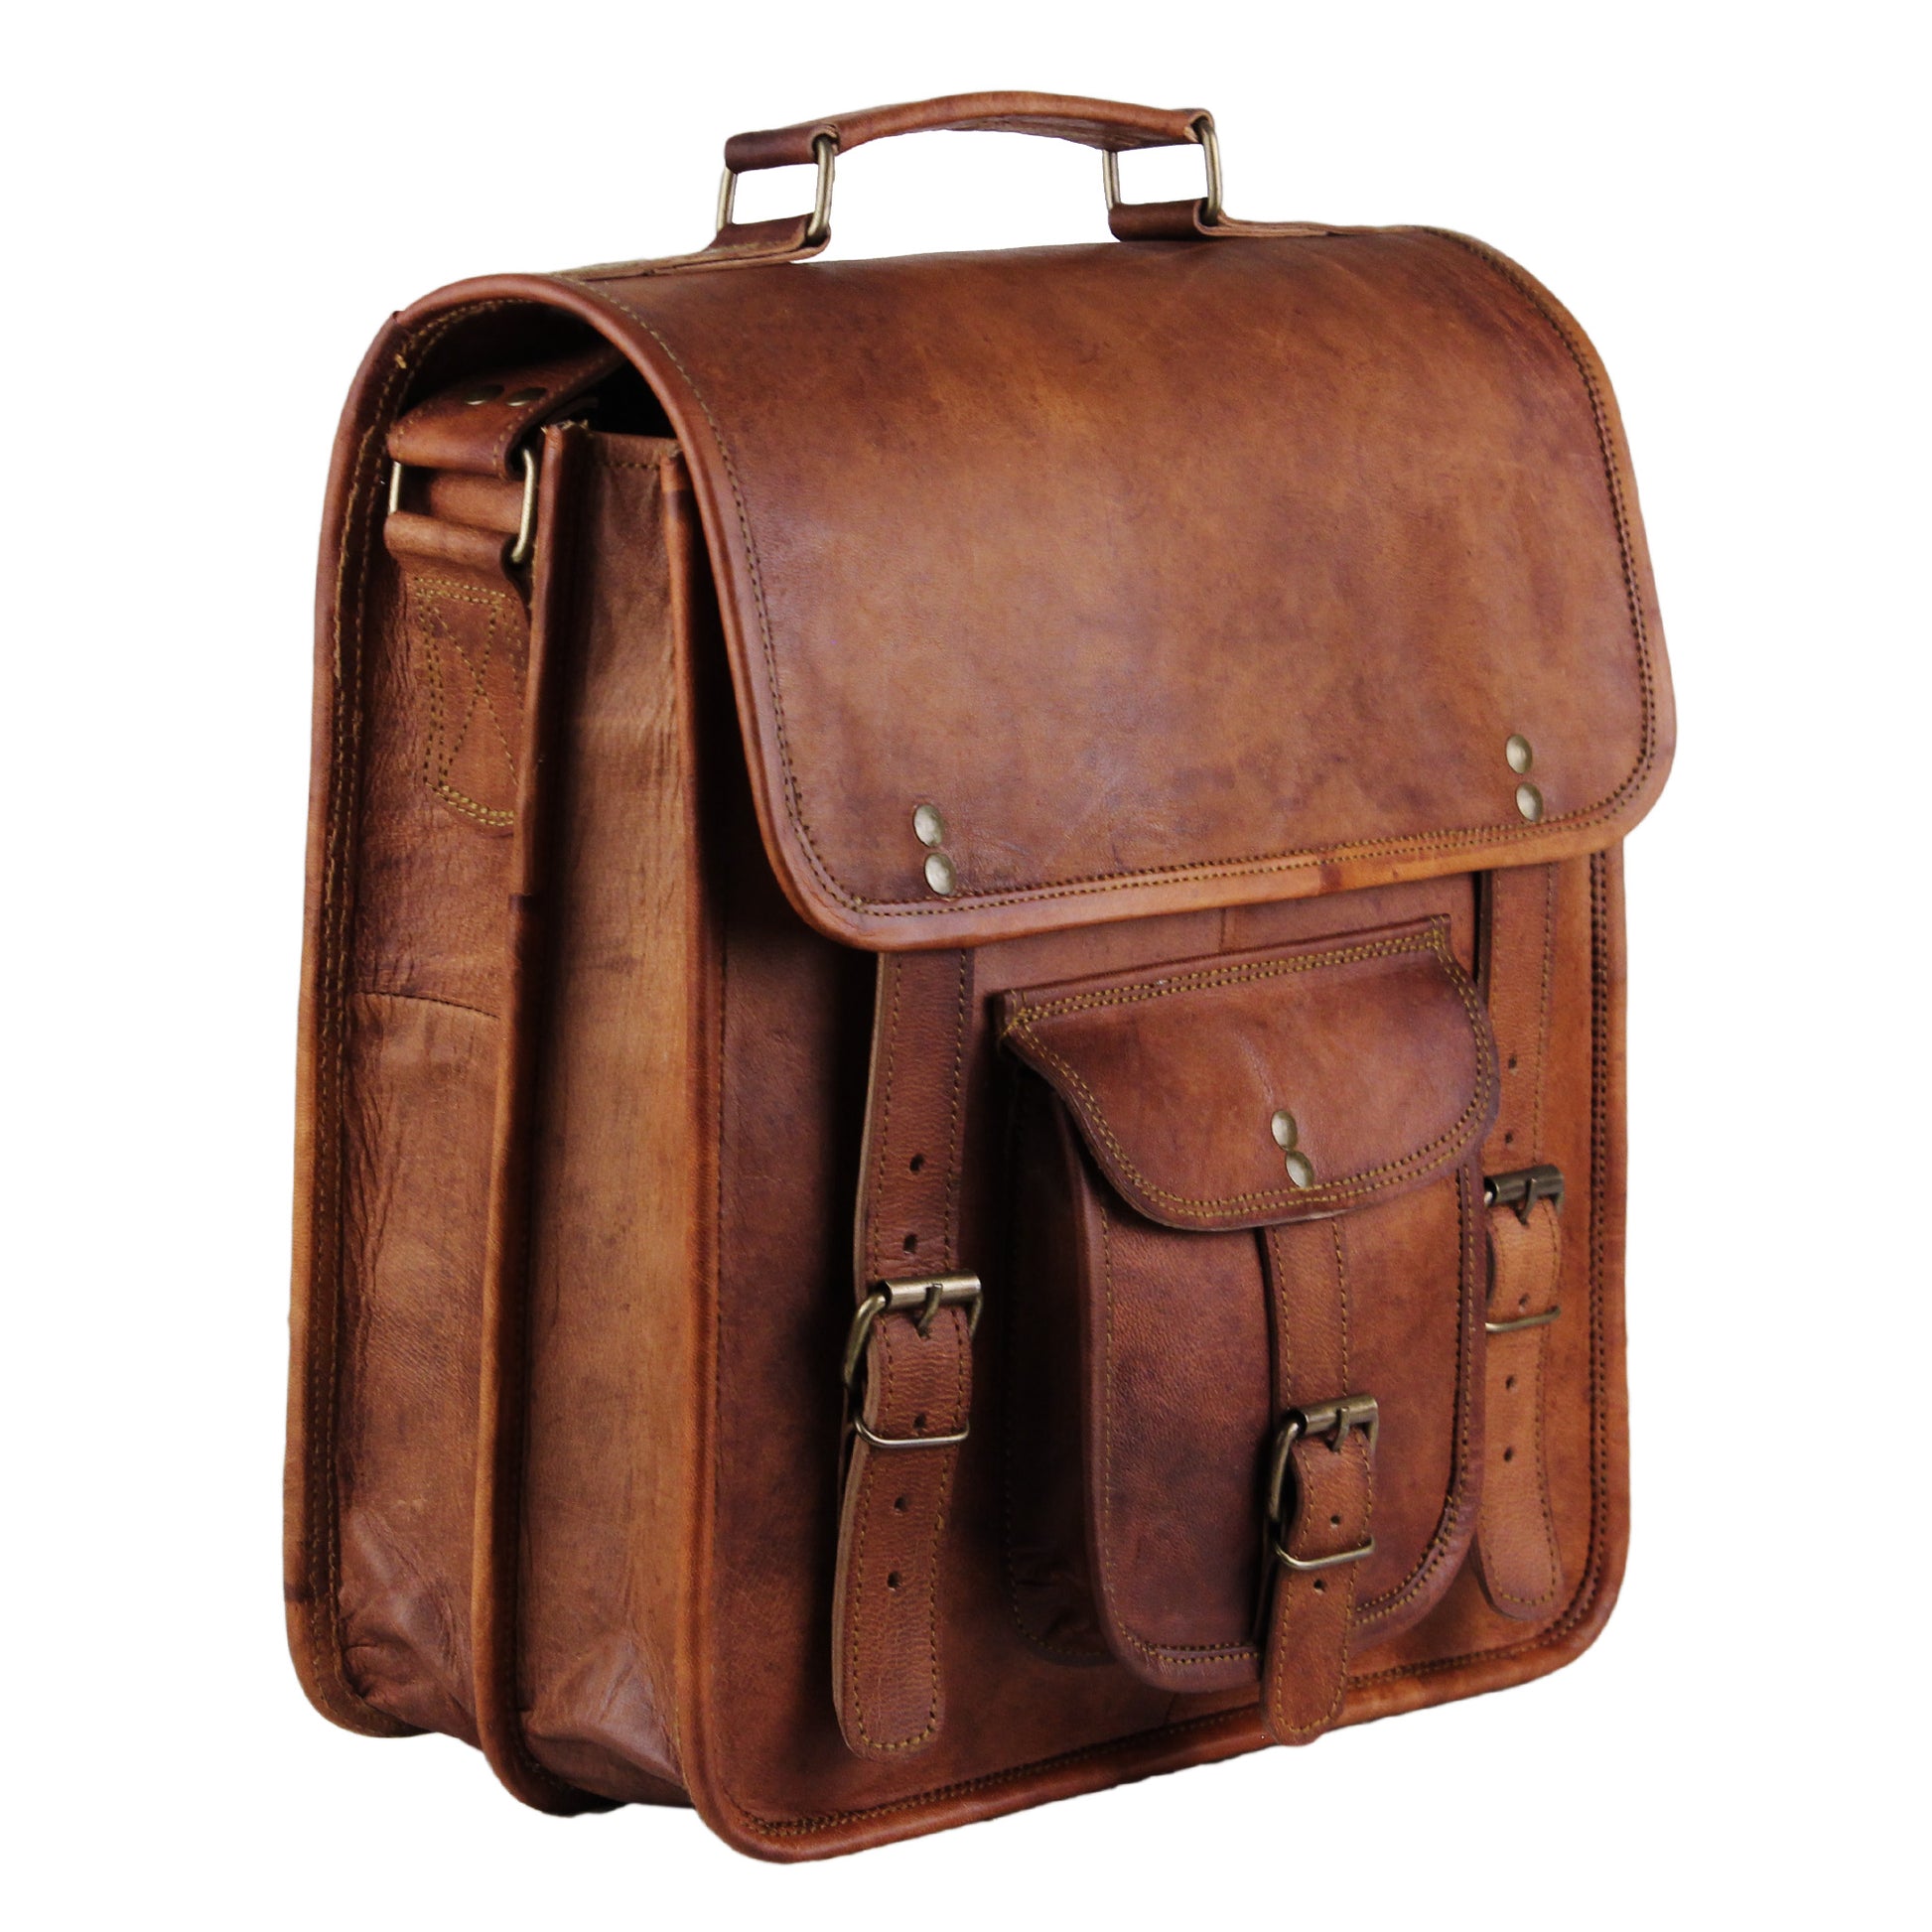 Full Grain Large Leather Brown Rustic Messenger Laptop Bag with Top Handle